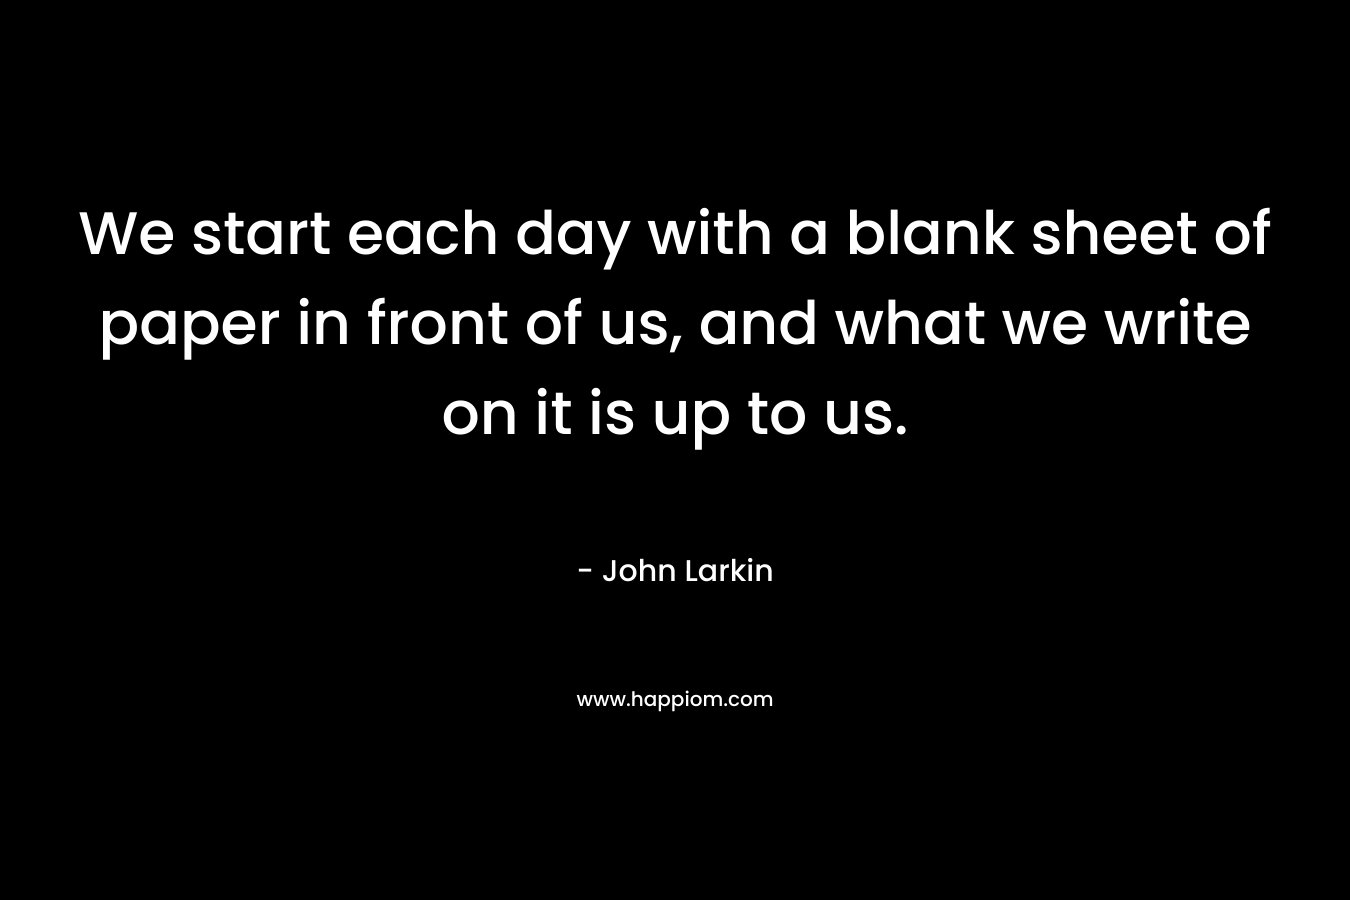 We start each day with a blank sheet of paper in front of us, and what we write on it is up to us.